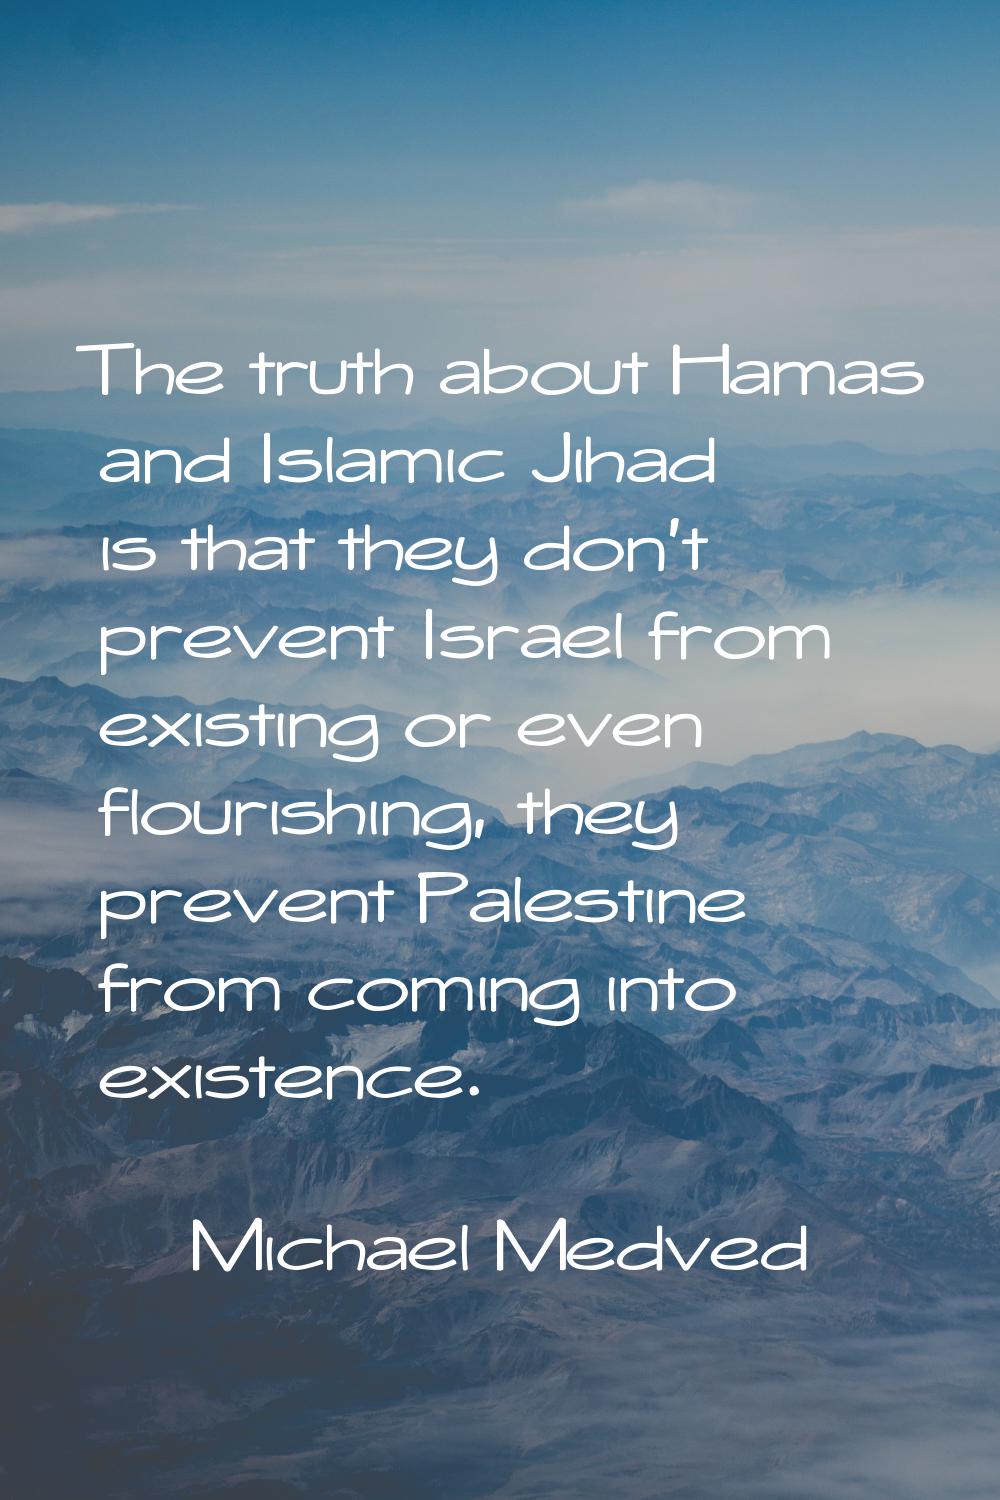 The truth about Hamas and Islamic Jihad is that they don't prevent Israel from existing or even flo